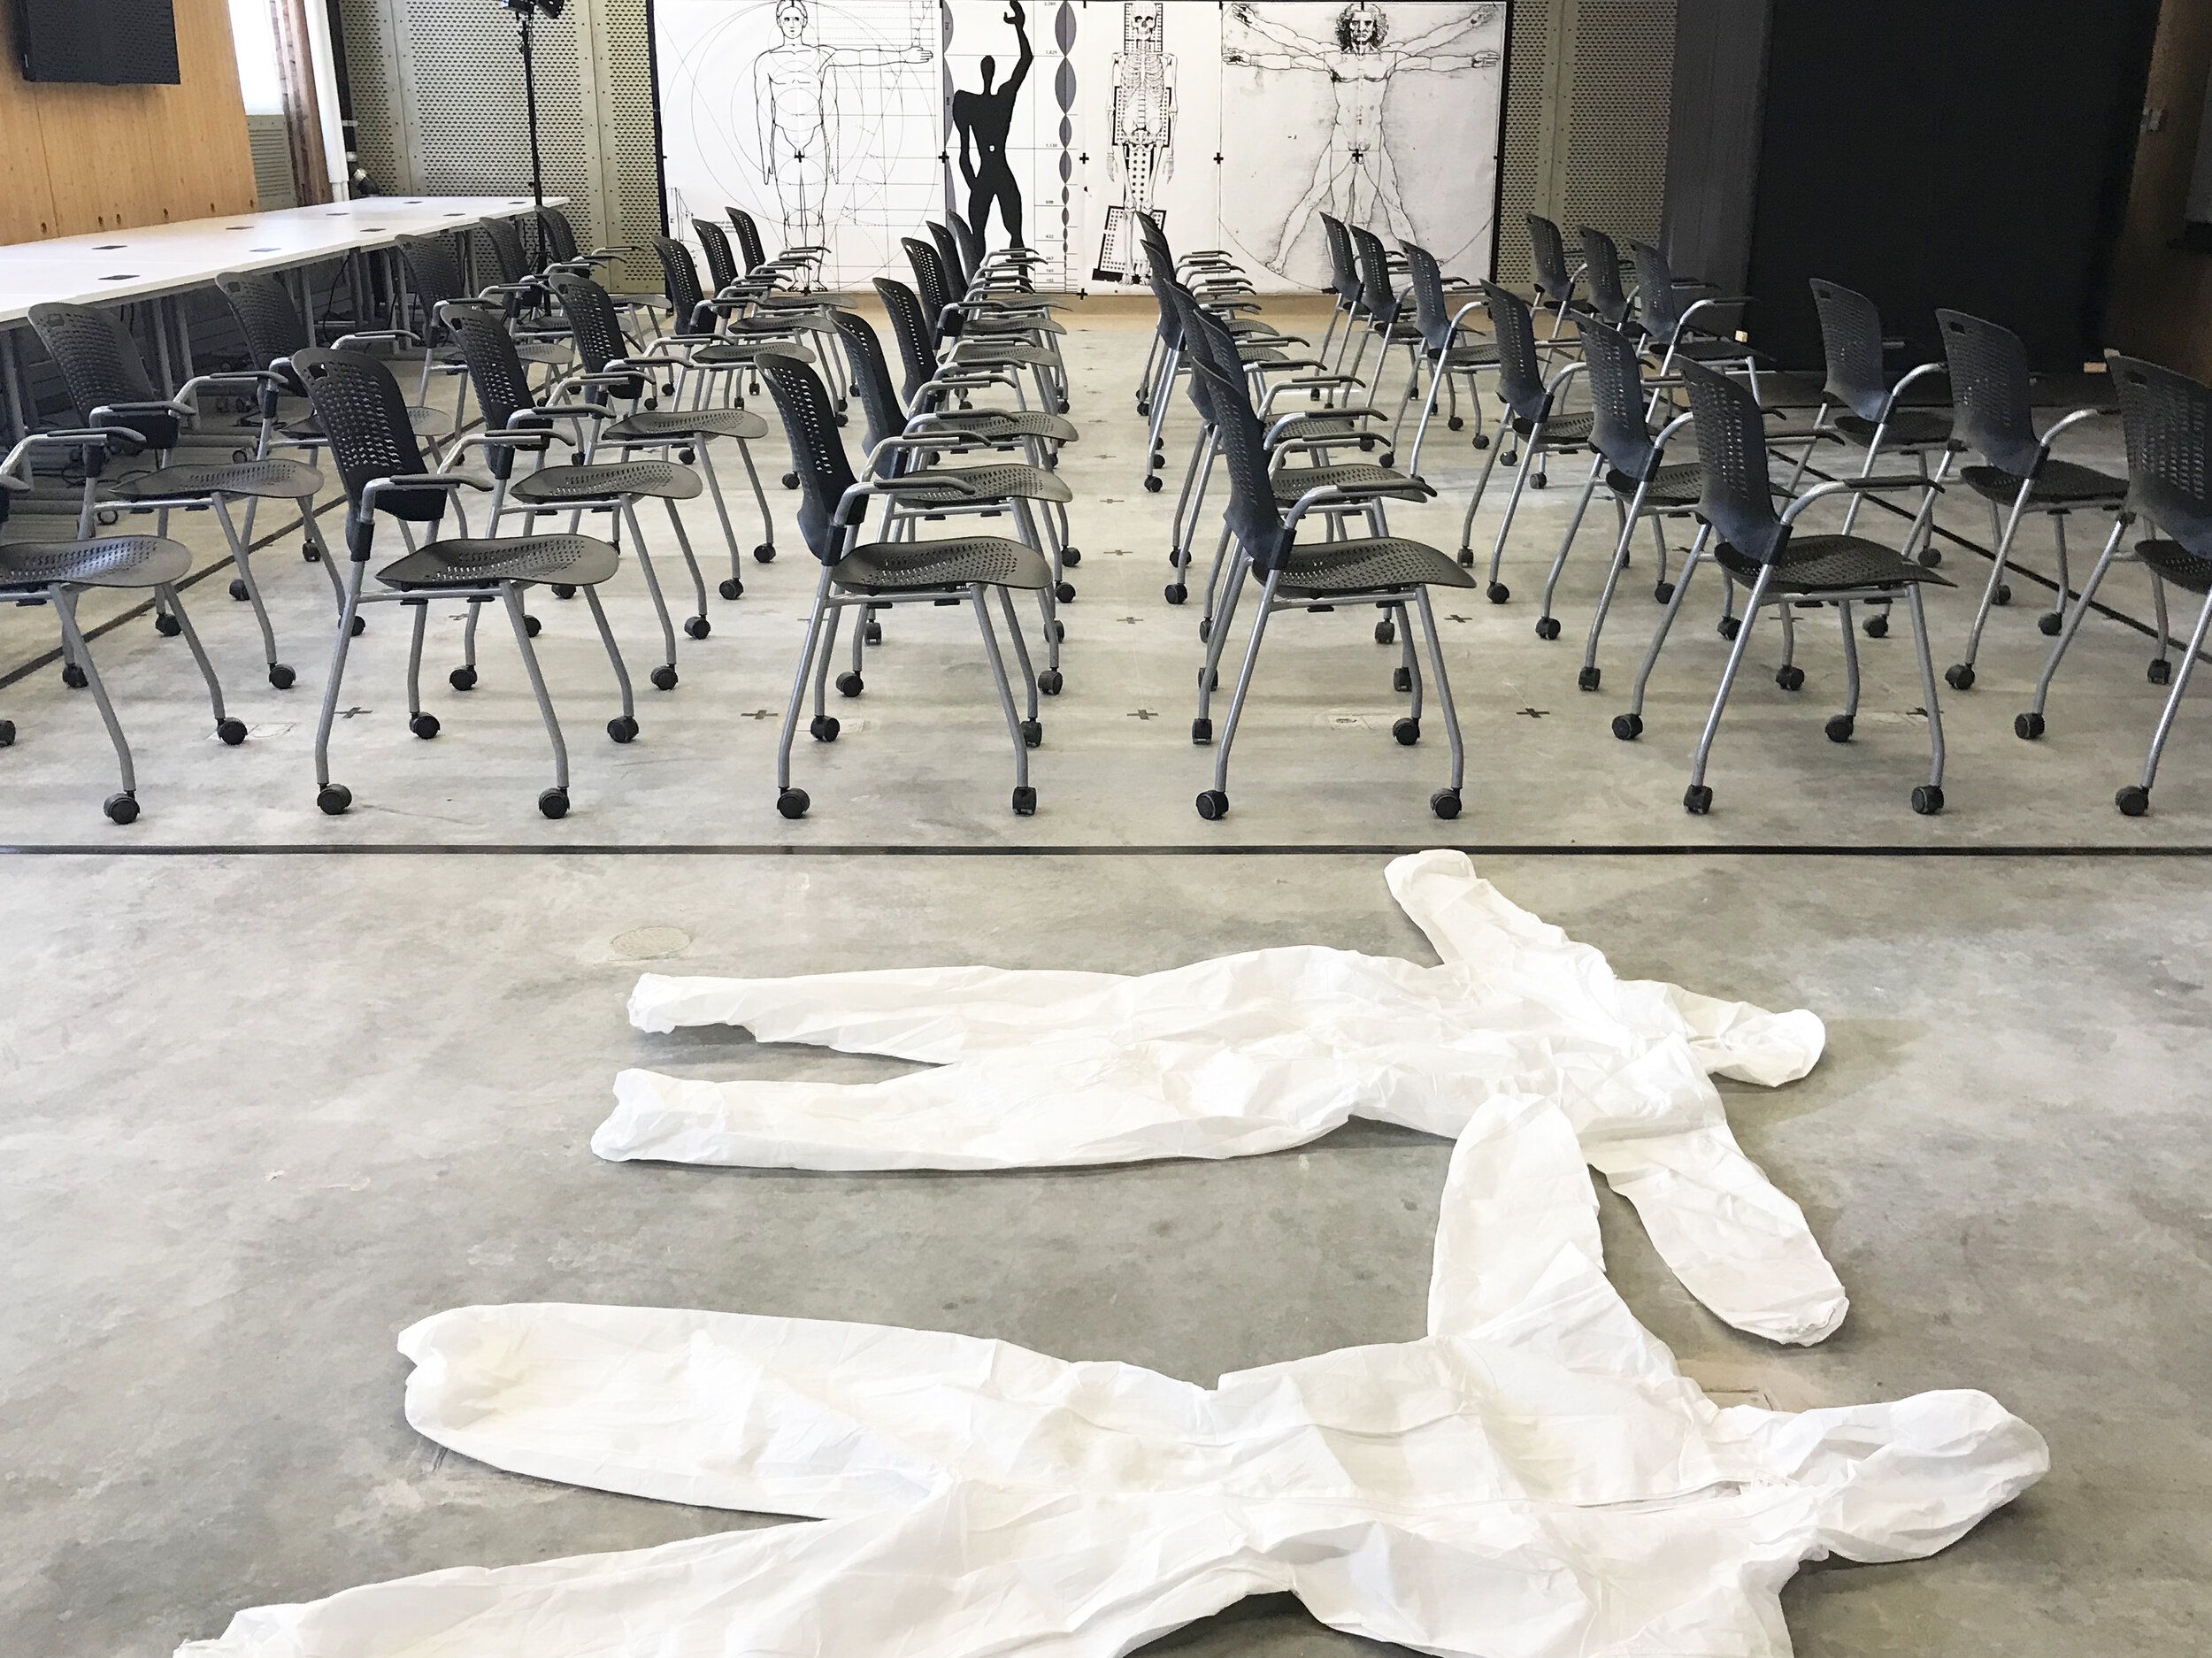  Seen here, just hours before the performance, is the rigorous seating ordinance at the centre of the room and, beyond that, the reproductions. In the foreground, the authors’ coveralls lie still,  awaiting critical collaboration. Photograph by Braed